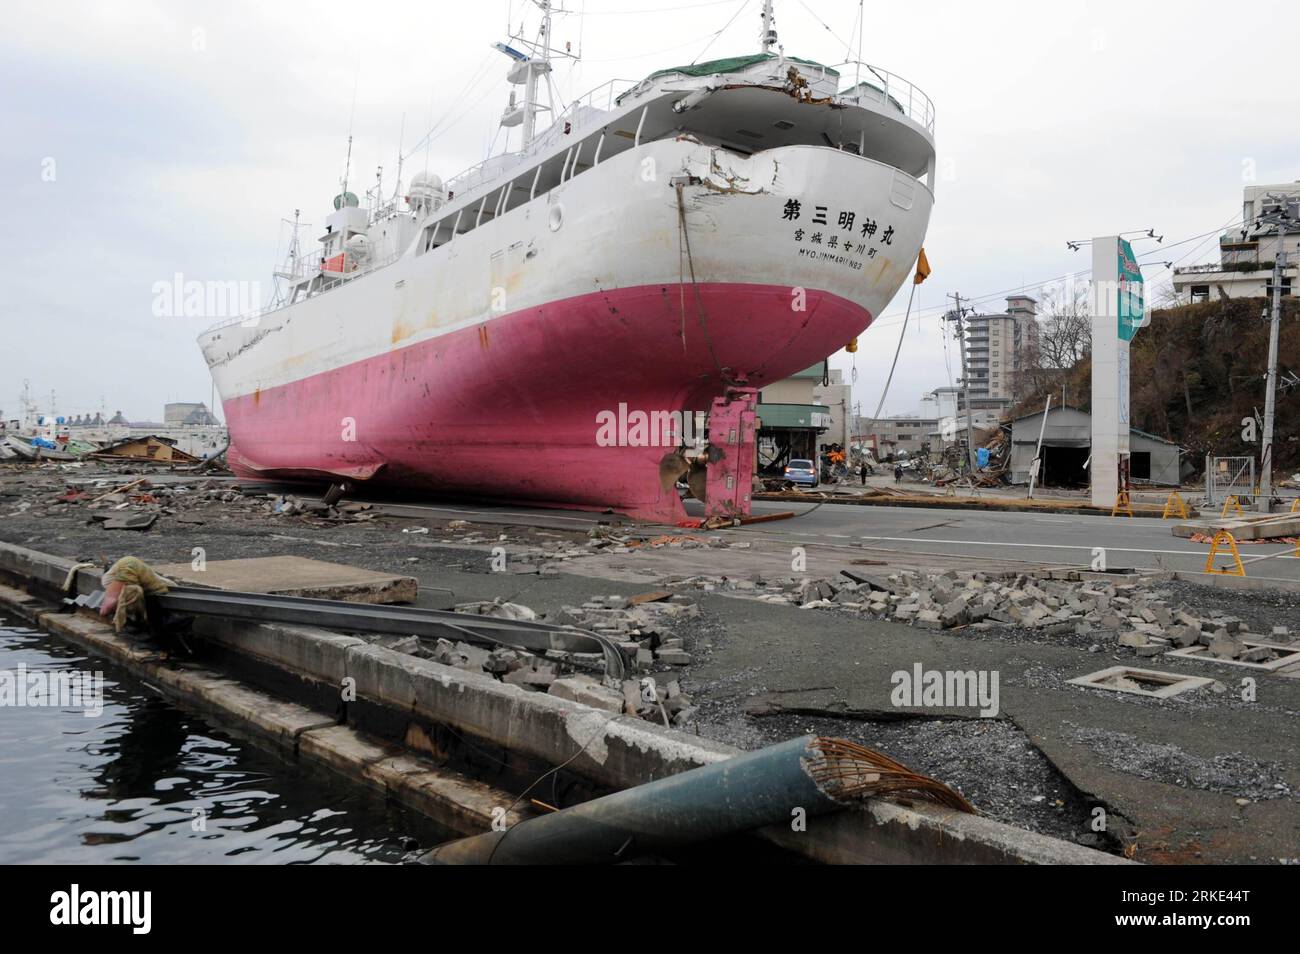 Bildnummer: 55049019  Datum: 21.03.2011  Copyright: imago/Xinhua (110321) -- MIYAGI-KEN, March 21, 2011 (Xinhua) -- A ship is seen on the ground in kesennuma, Miyagi-ken in Japan, March 21, 2011. Japan s recent earthquake and tsunami would cause up to 235 billion U.S. dollars in damage and a temporary impact on the economic growth of Japan and the region, but the growth will pick up after mid-2011 as reconstruction efforts get underway, the World Bank said in a report on Monday. (Xinhua/Song Zhenping) (lmz) JAPAN-MIYAGI-KEN-QUAKE PUBLICATIONxNOTxINxCHN Gesellschaft Japan Naturkatastrophe Erdbe Stock Photo